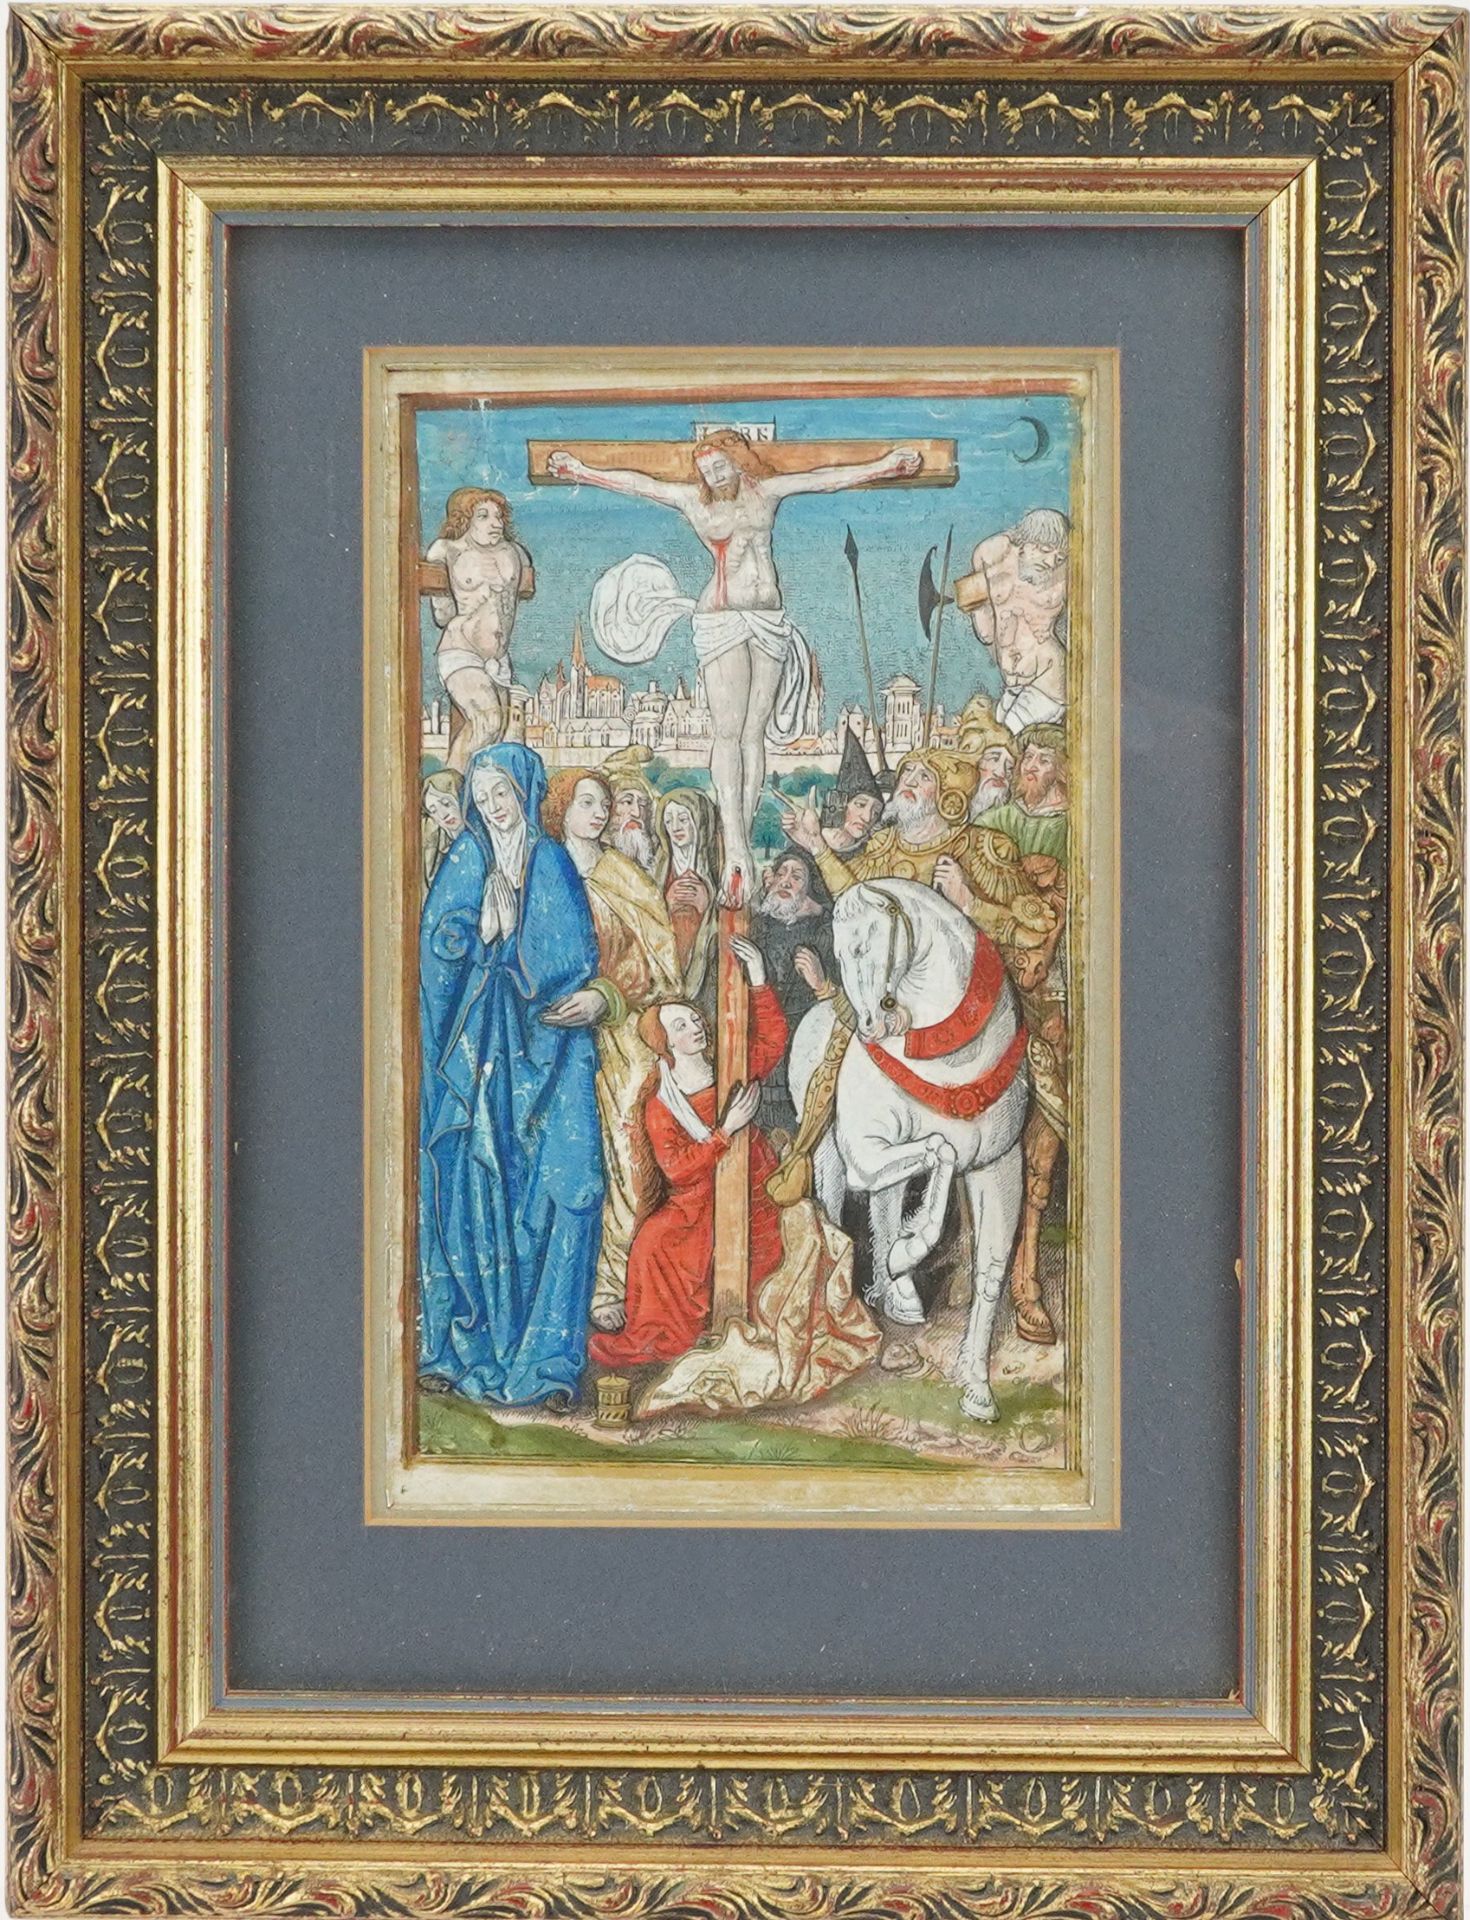 Antique illuminated Latin manuscript leaf from Book of Hours, possibly 16th century, mounted, framed - Image 2 of 4